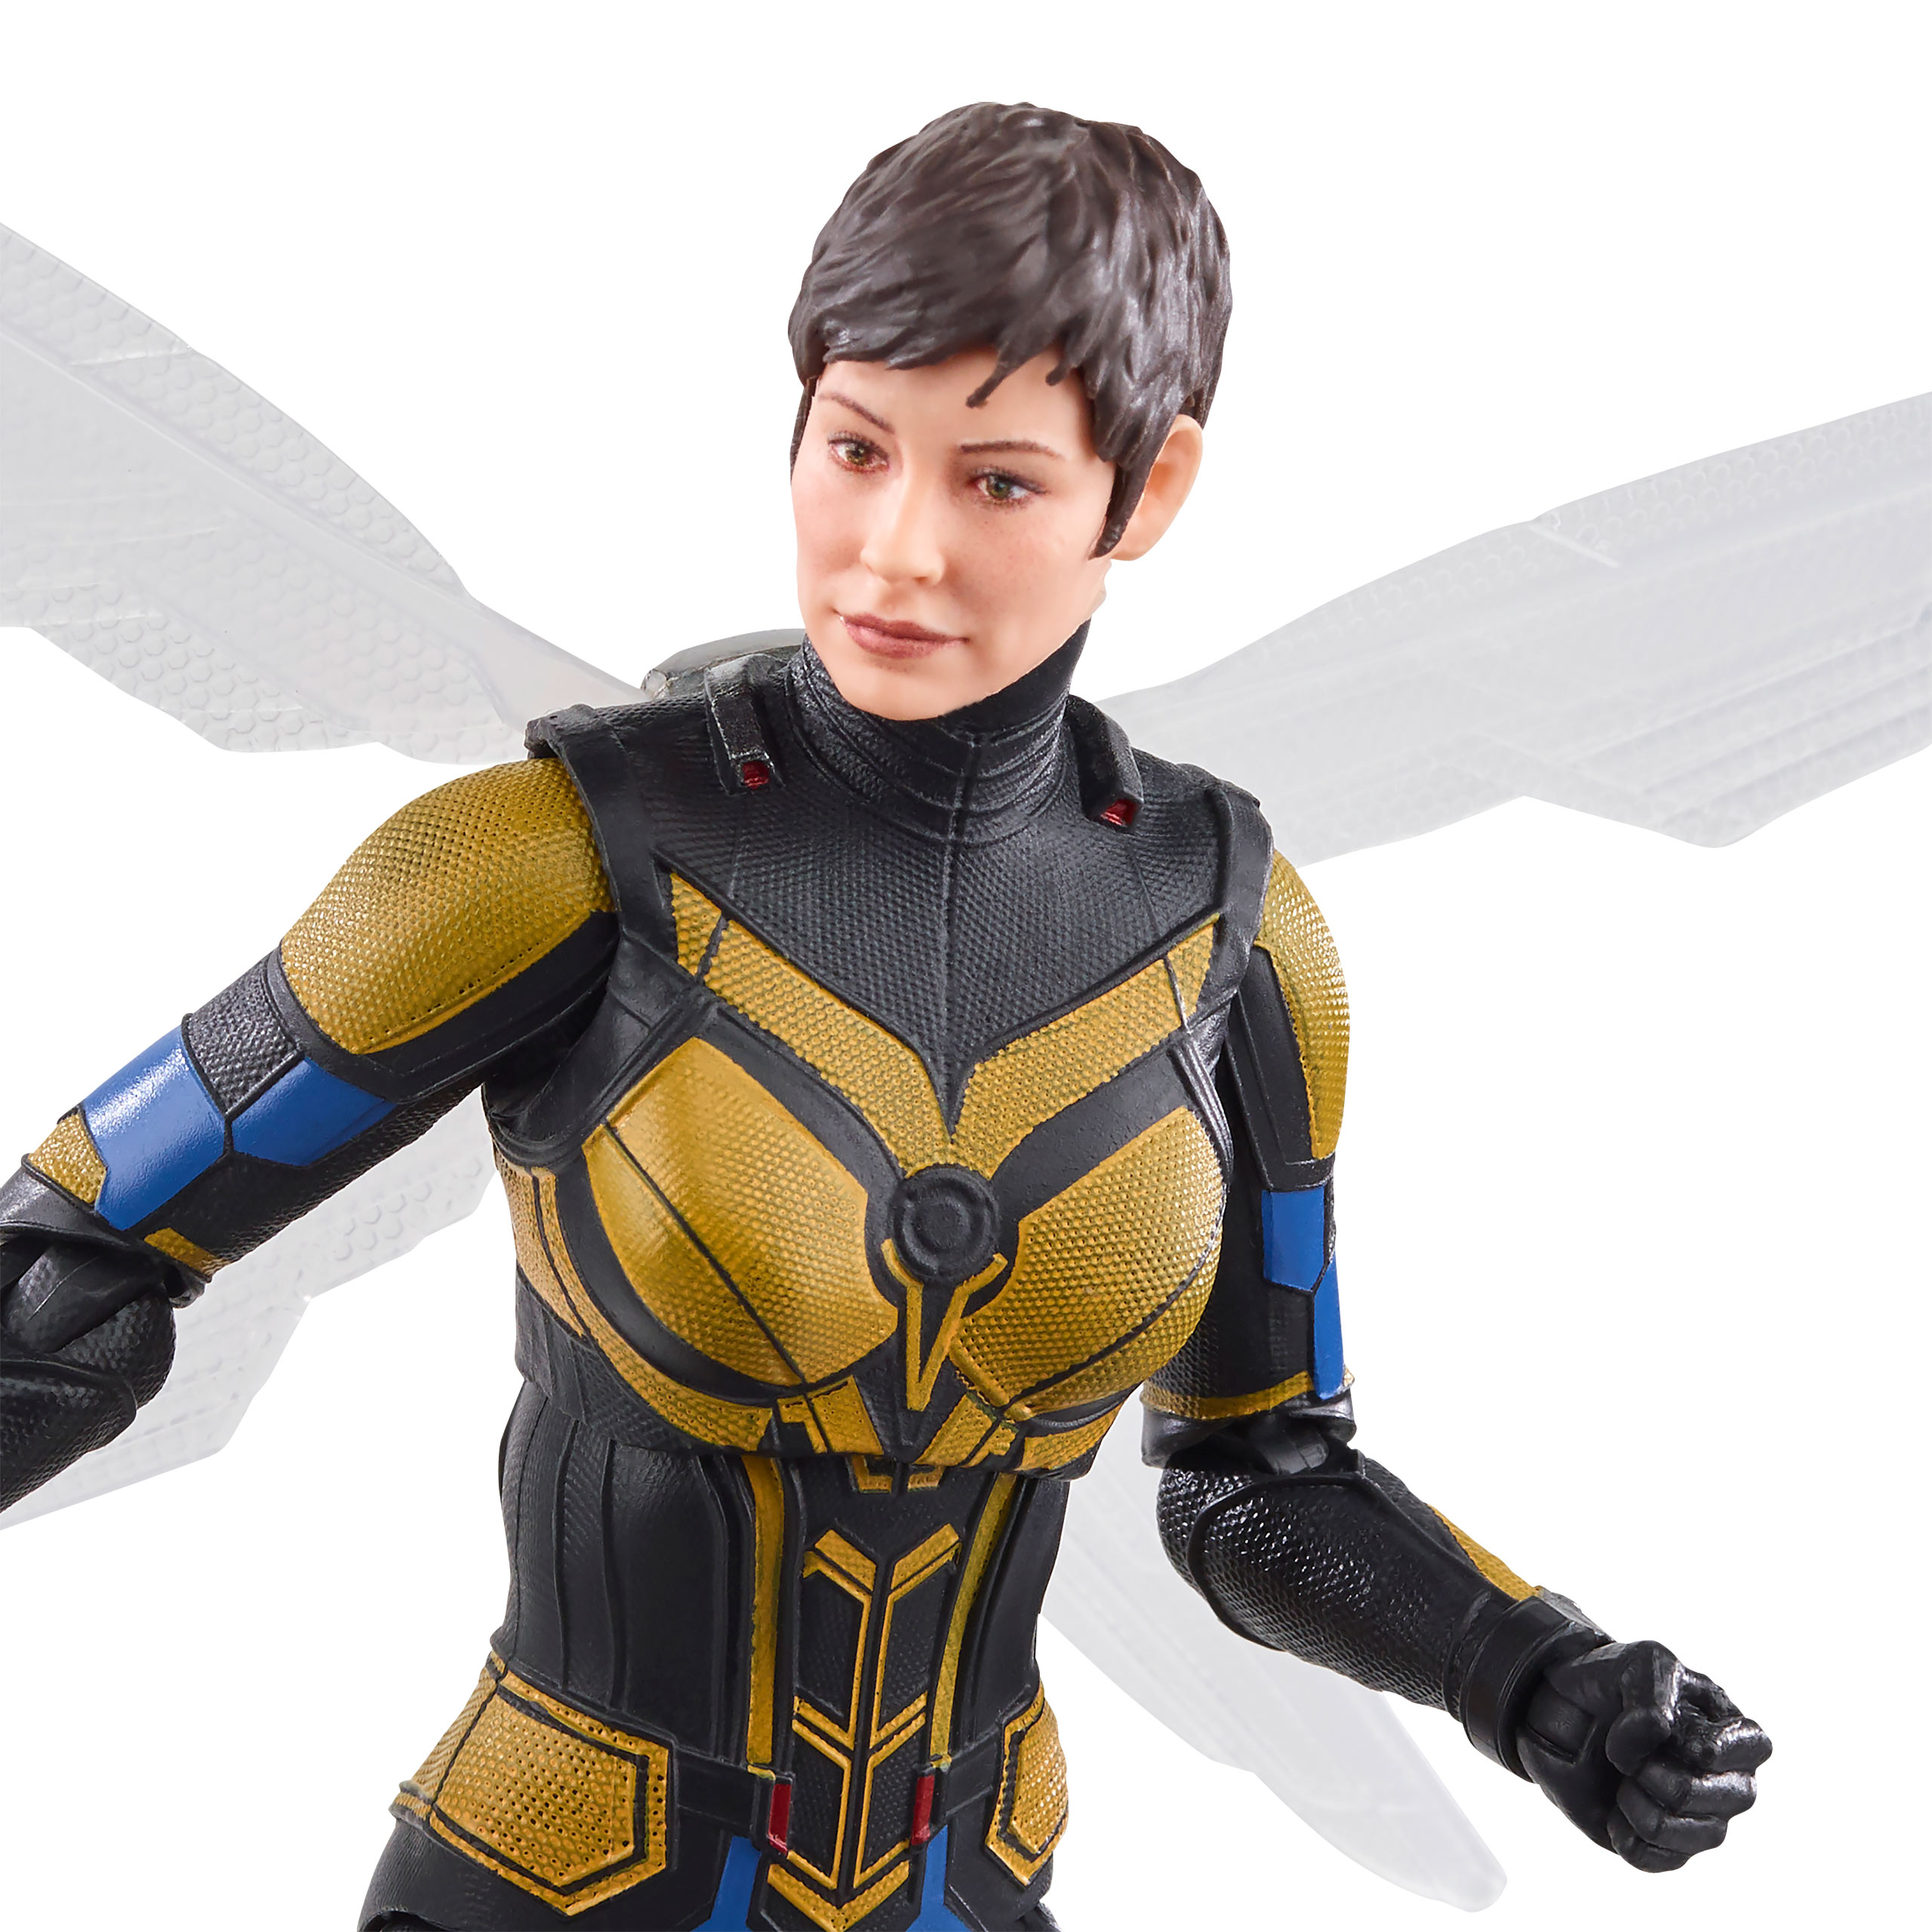 Ant-Man and the Wasp - Marvel's Wasp Quantumania Action Figure